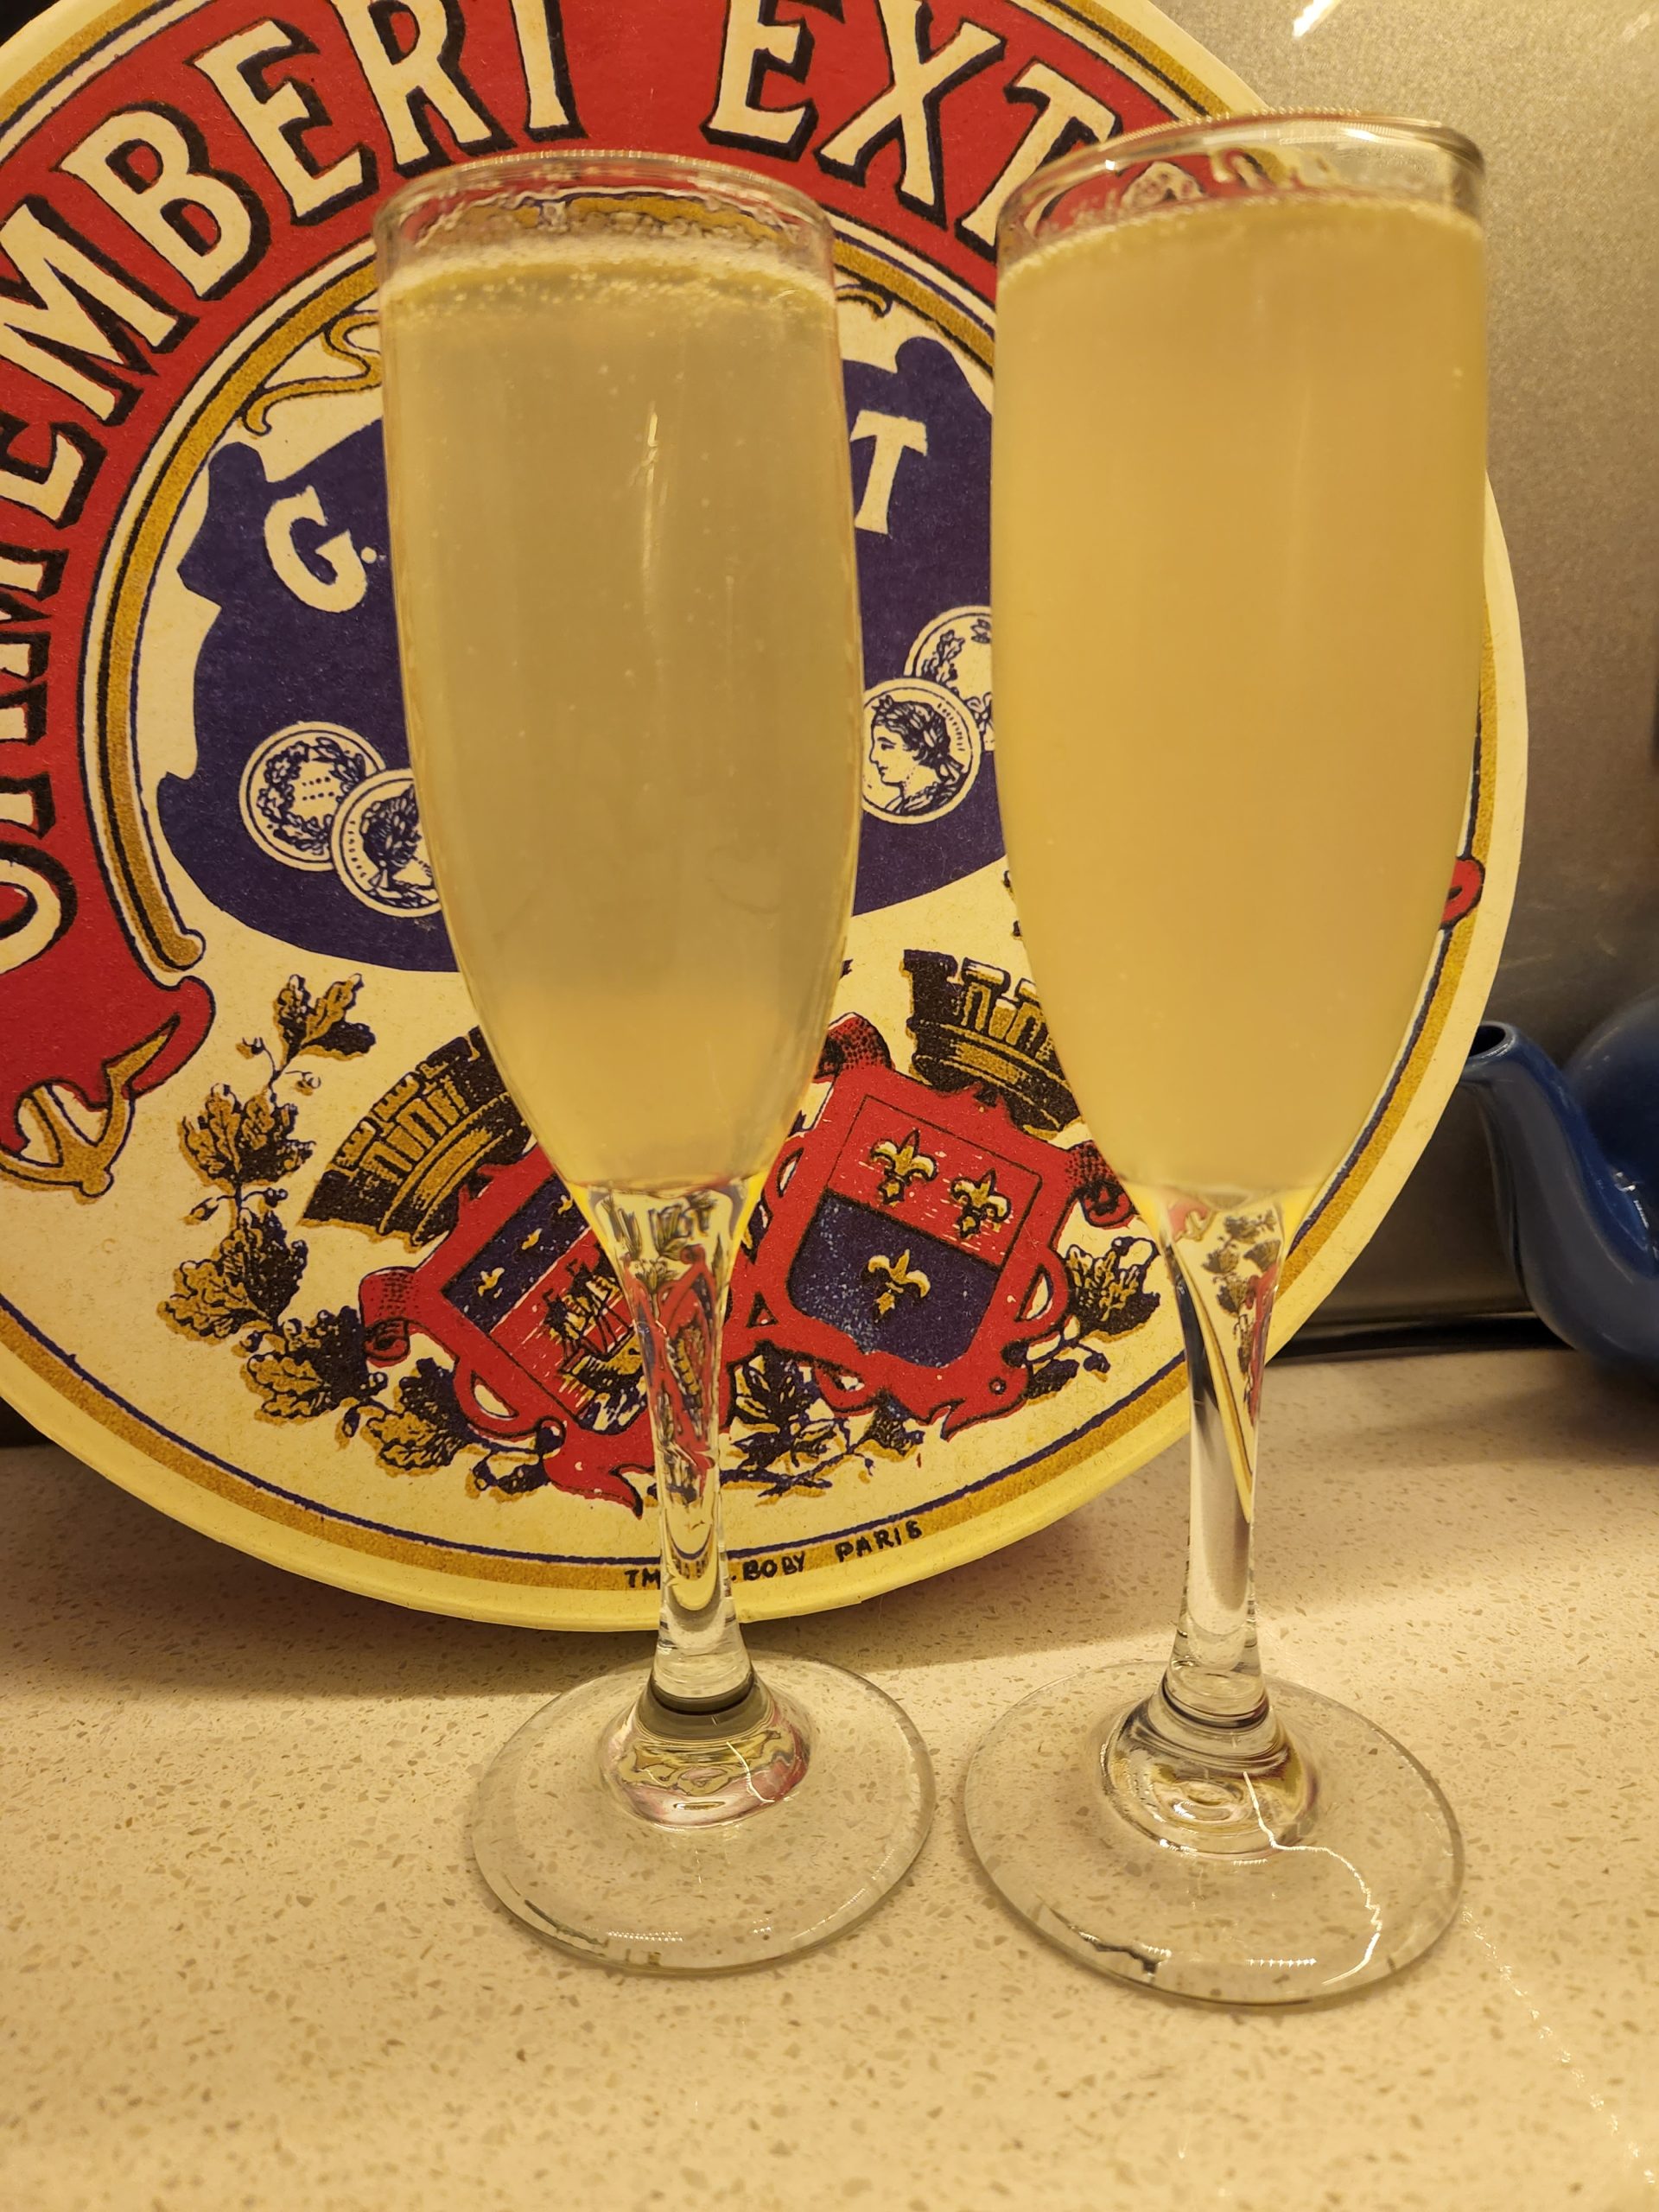 Two French 75 cocktails in Champagne flutes.